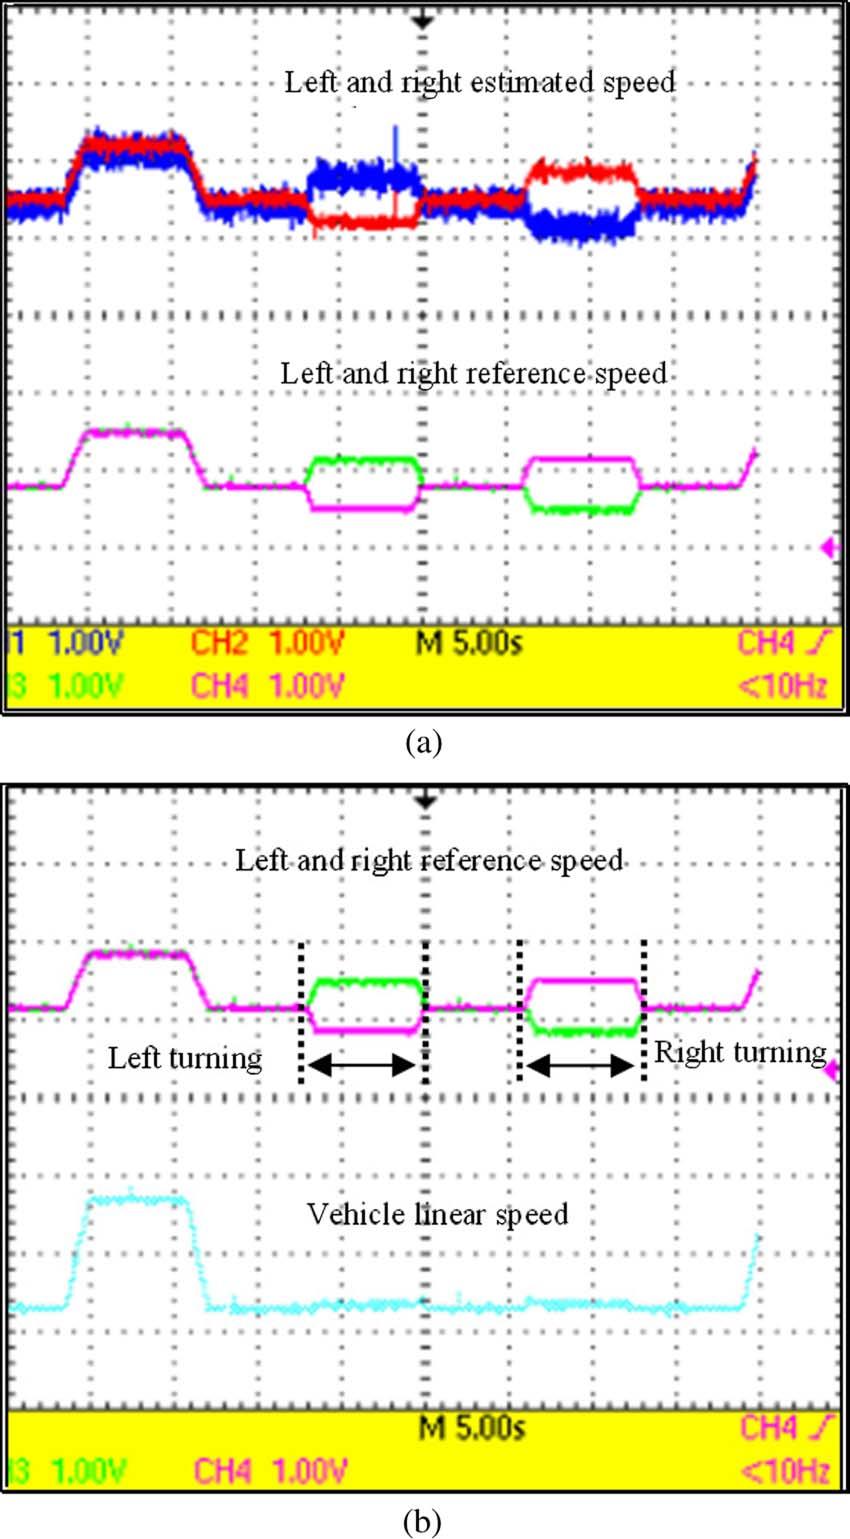 11 shows the EV electronic differential responses in terms of right and left induction motor speeds under right and left turning ways [see Fig. 11(a)].